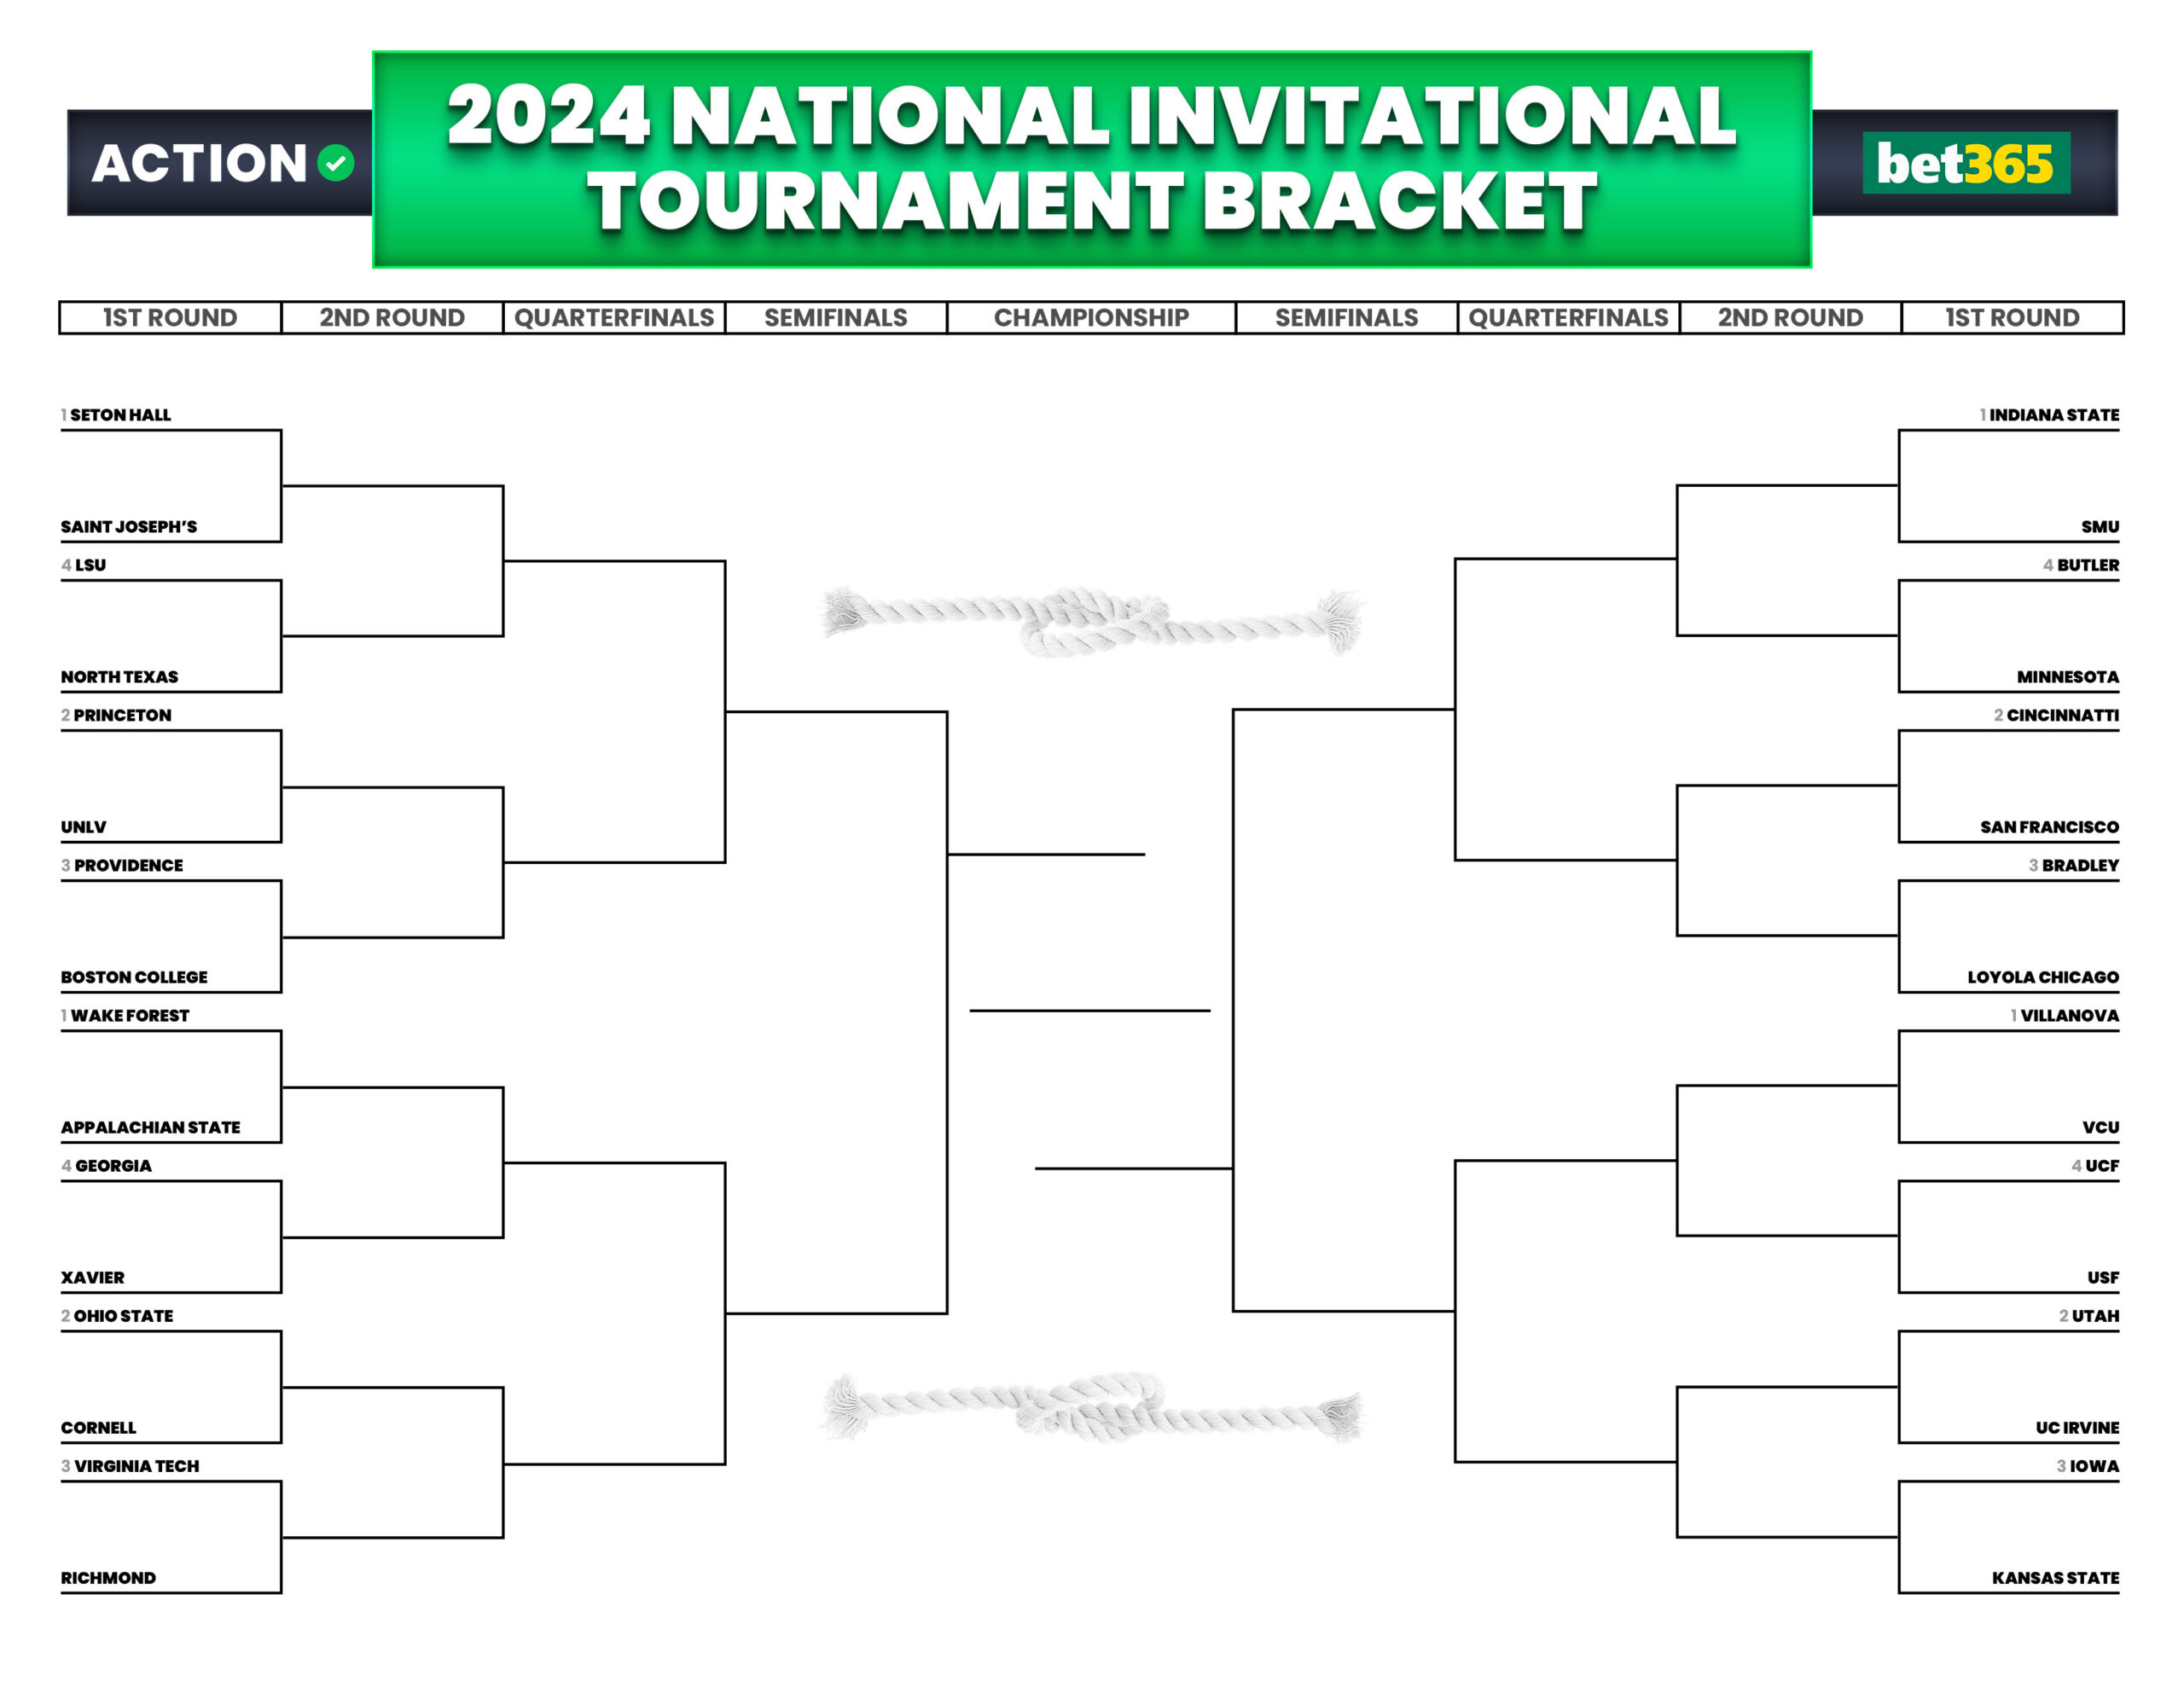 2024 NIT Tournament Bracket, Odds, Schedule for First Round Games